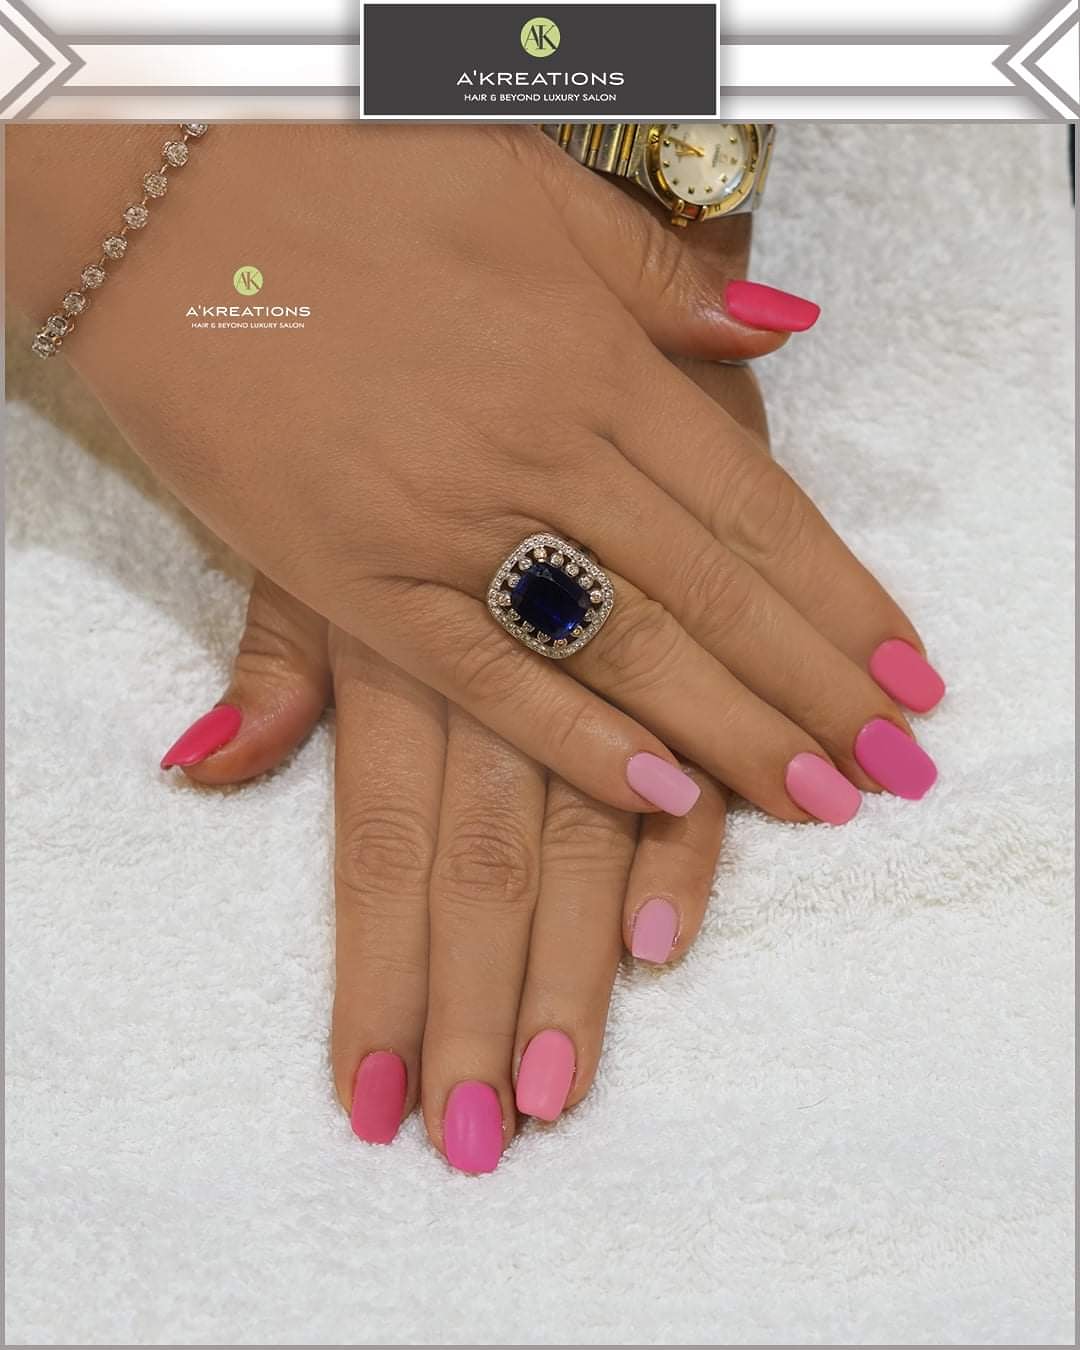 GLAM Cover Pink Gel | Nail Extensions | The Nail Shop